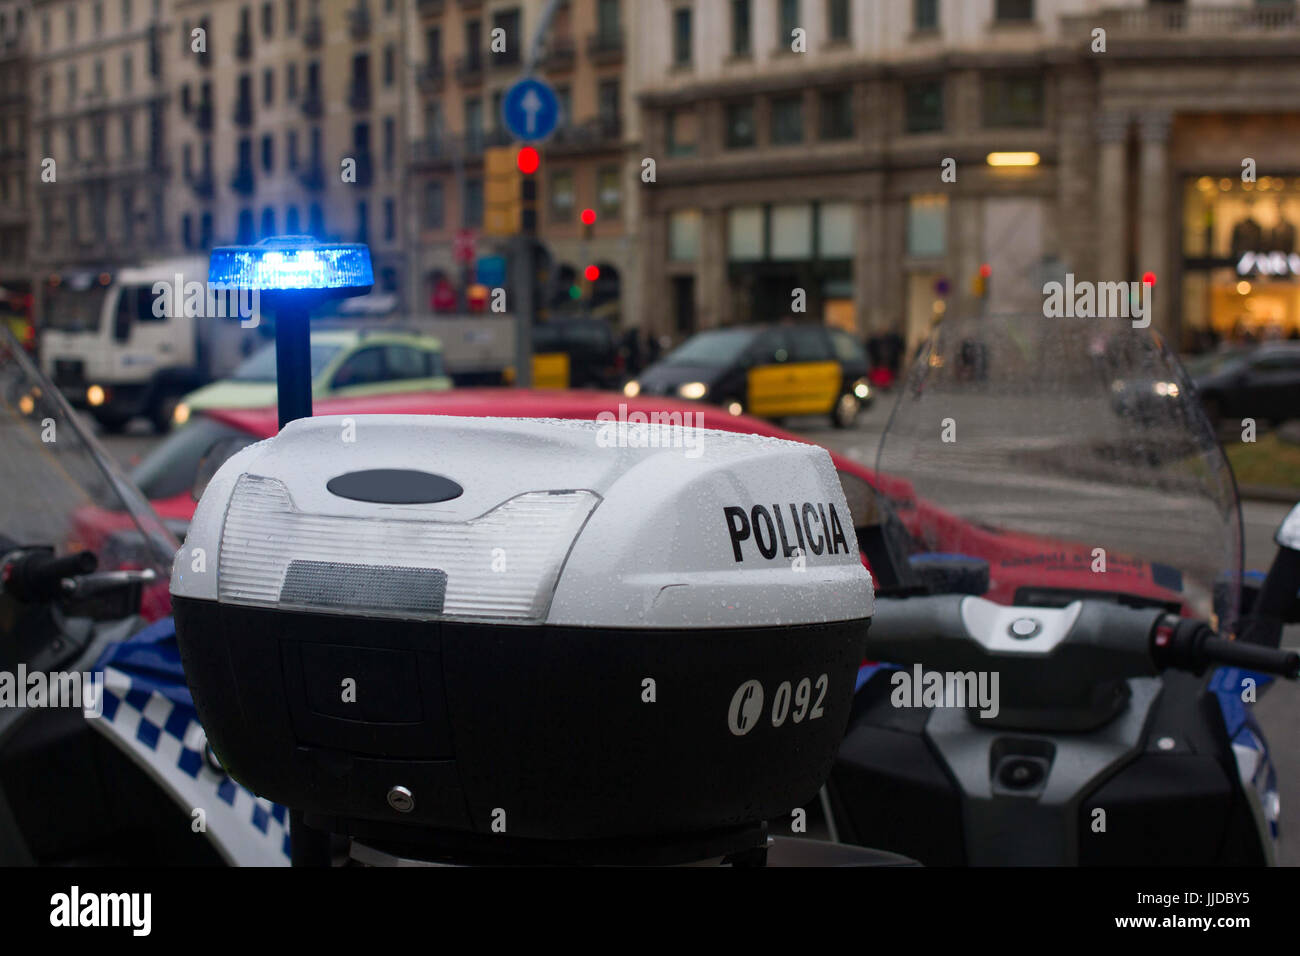 Spanish police car standing in the yard, Upper part with lights Stock Photo